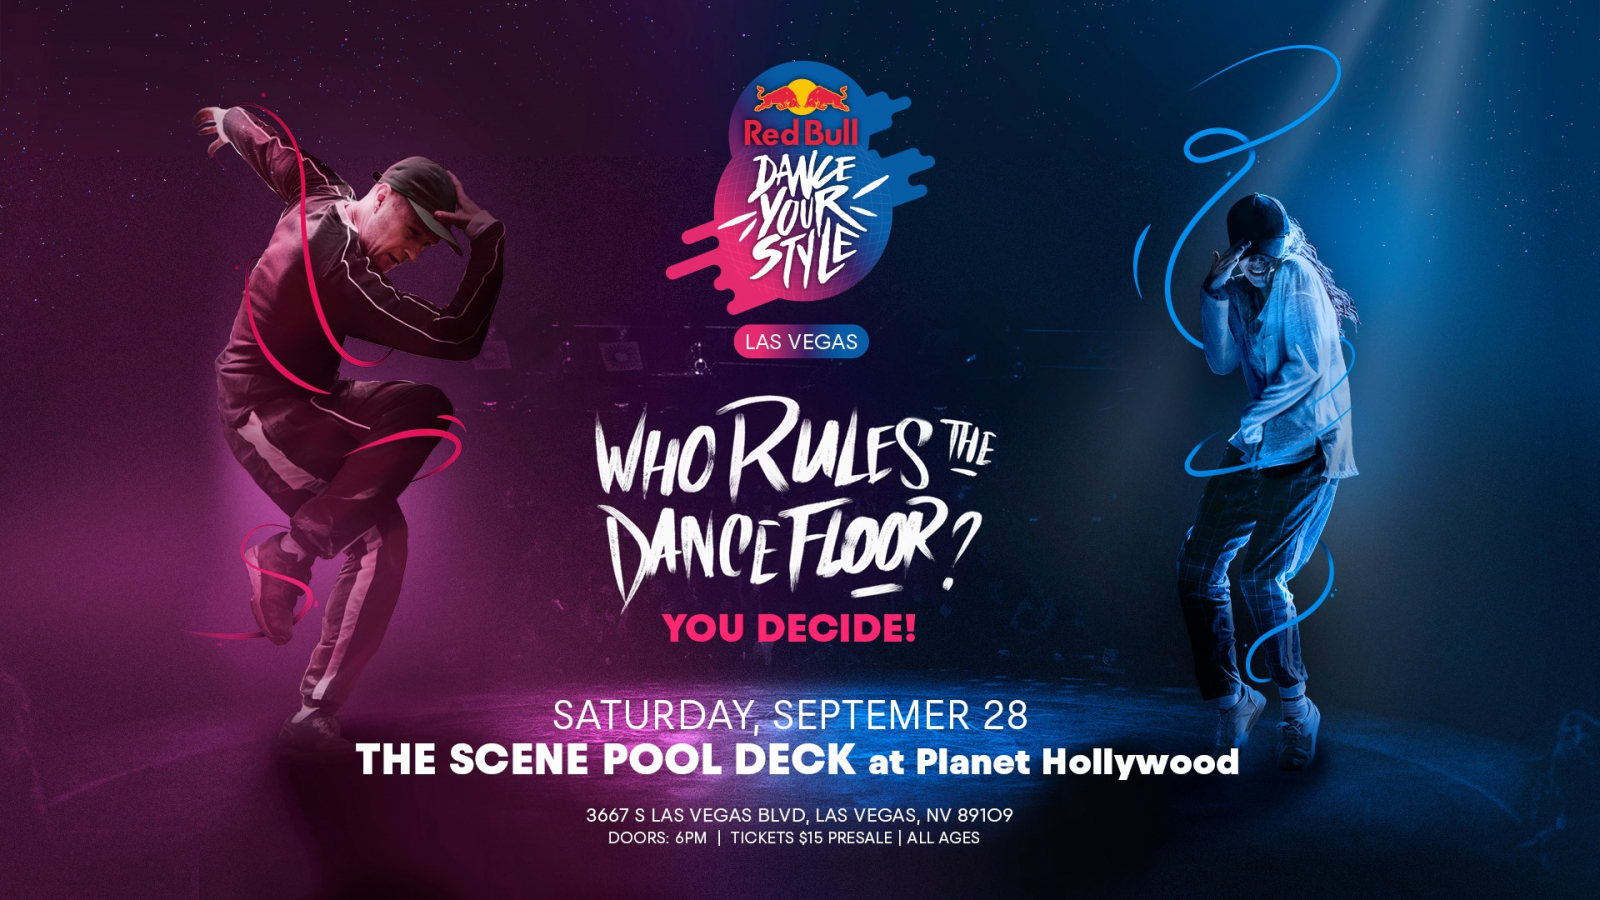 Red Bull Dance Your Style USA Finals 2019 poster